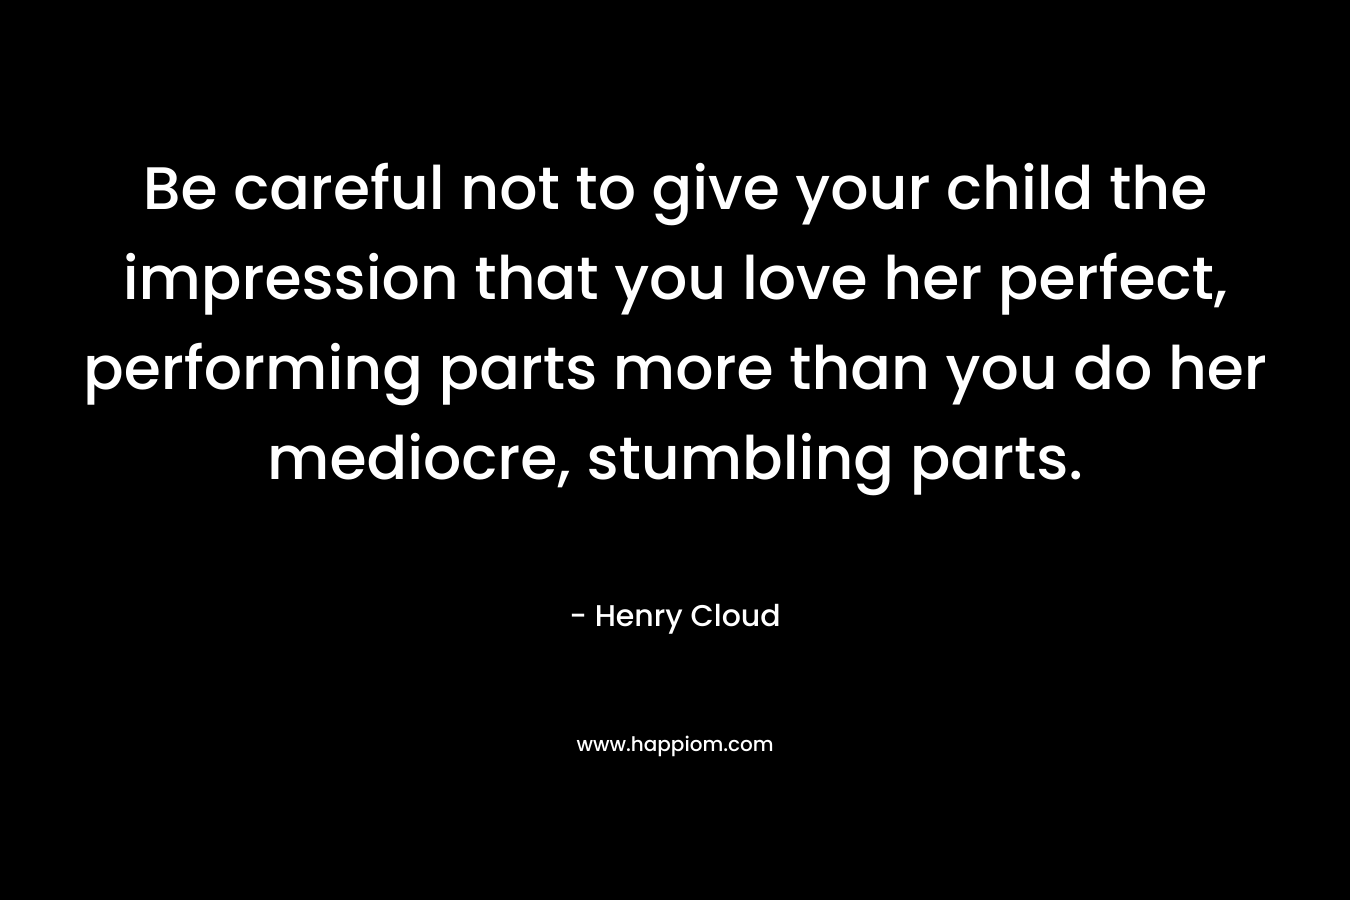 Be careful not to give your child the impression that you love her perfect, performing parts more than you do her mediocre, stumbling parts. – Henry Cloud